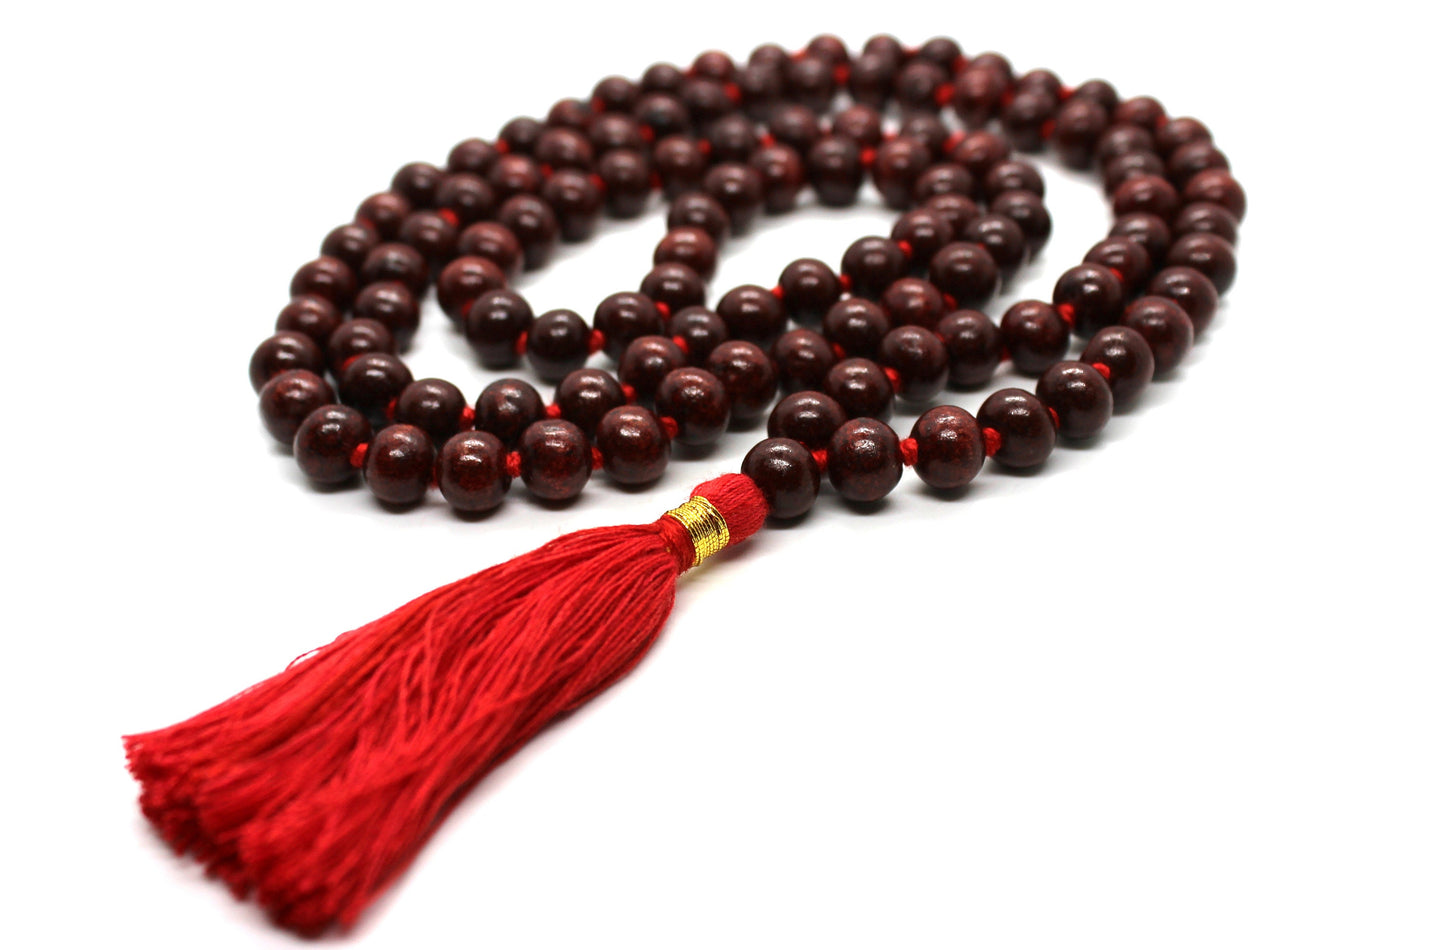 8mm Indian Rosewood with Red / Premium Cotton String TasselClassic 108 Knotted Meditation Mala | Elegant Natural Design | Yoga Necklace